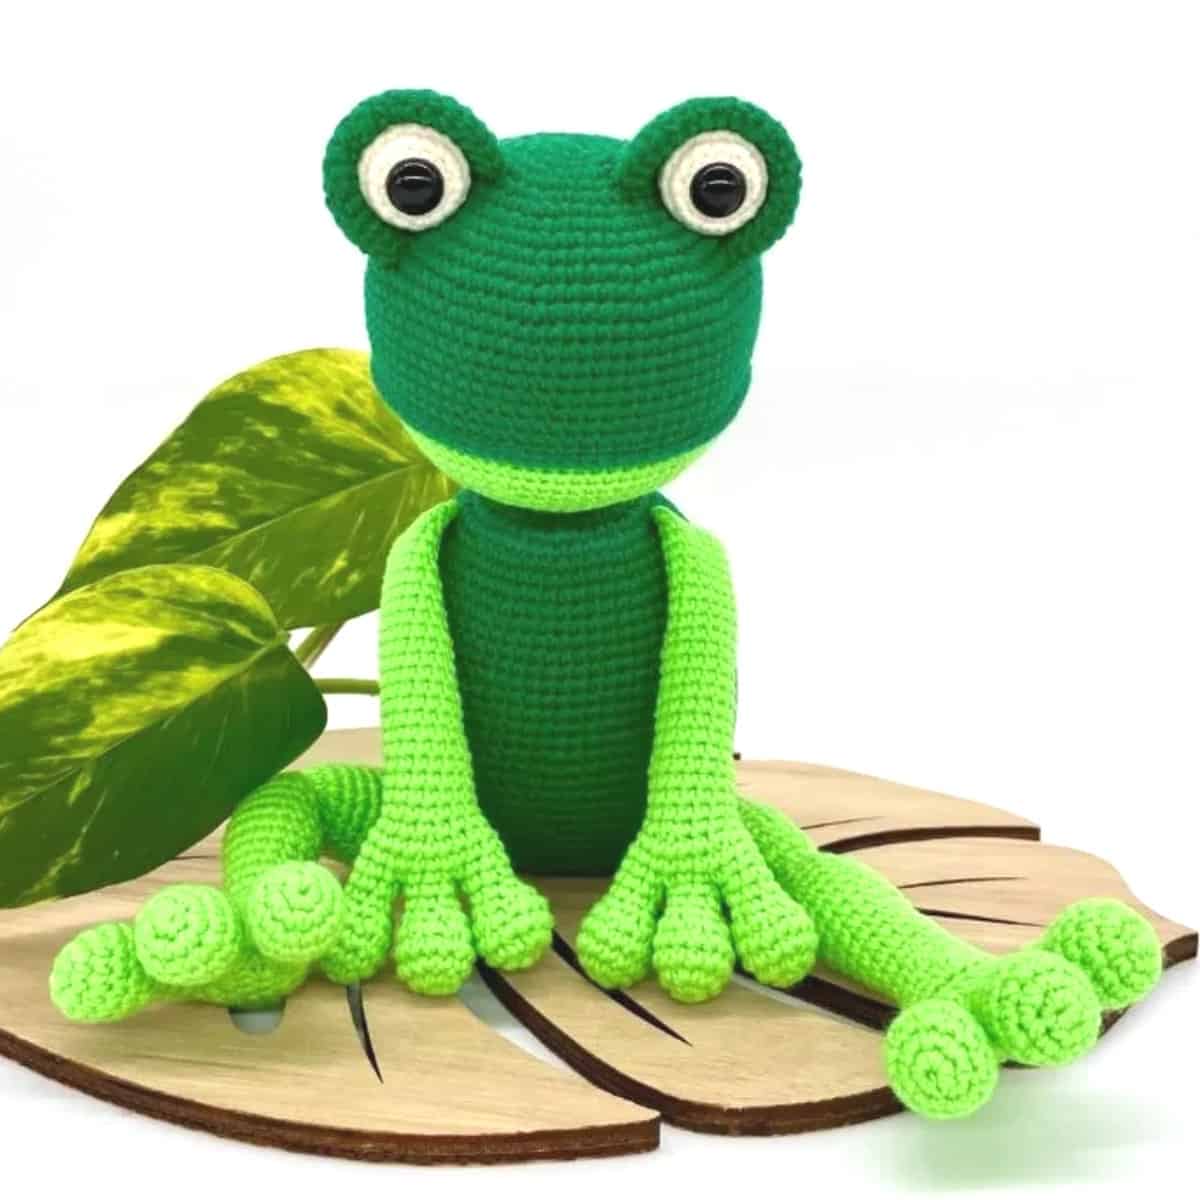 Crocheted frog toy is sitting on a wooden leaf.